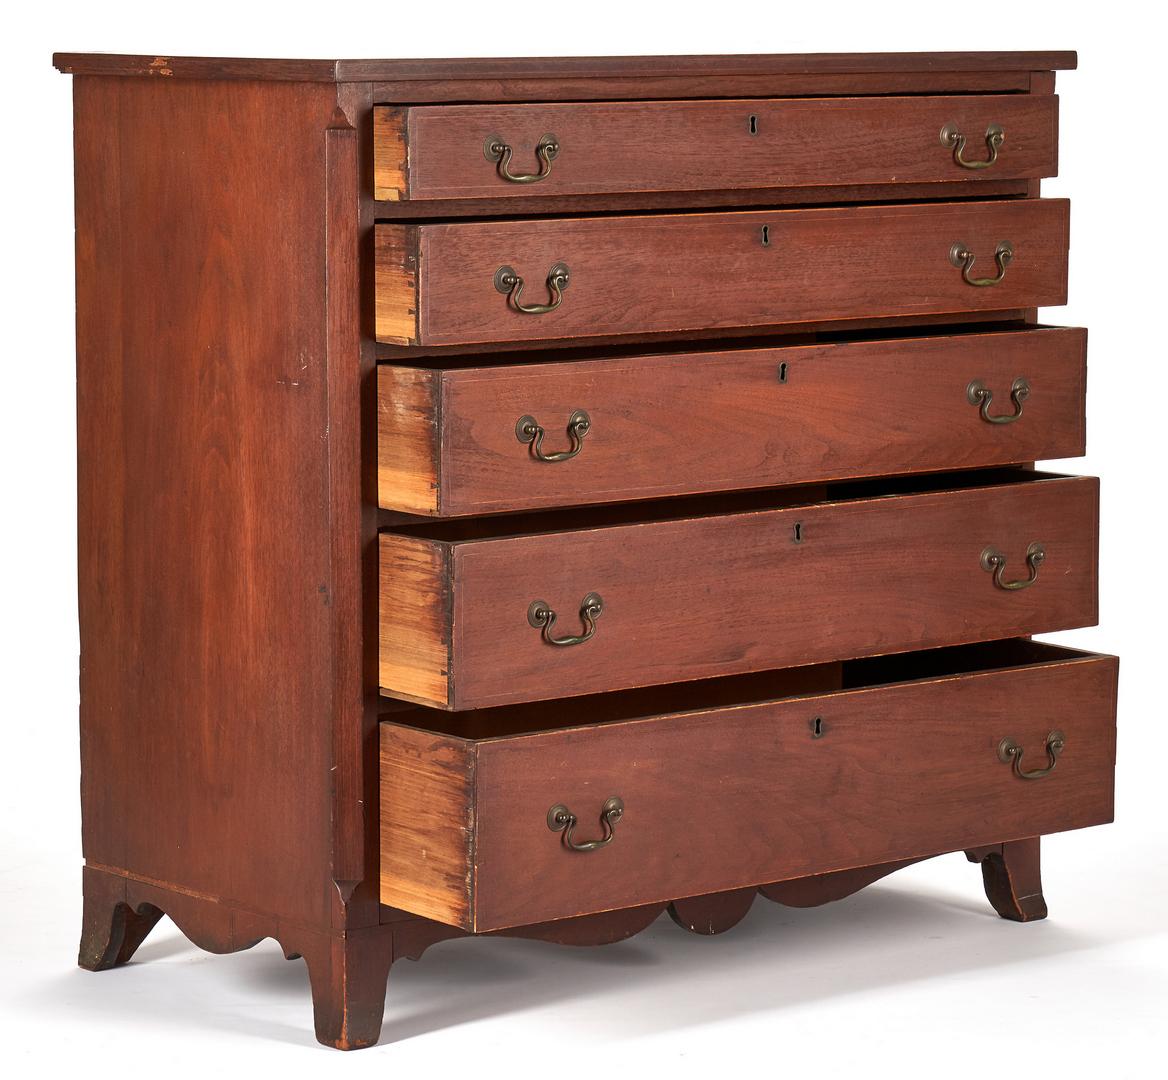 Federal Inlaid Hepplewhite Chest of Drawers - Image 14 of 28